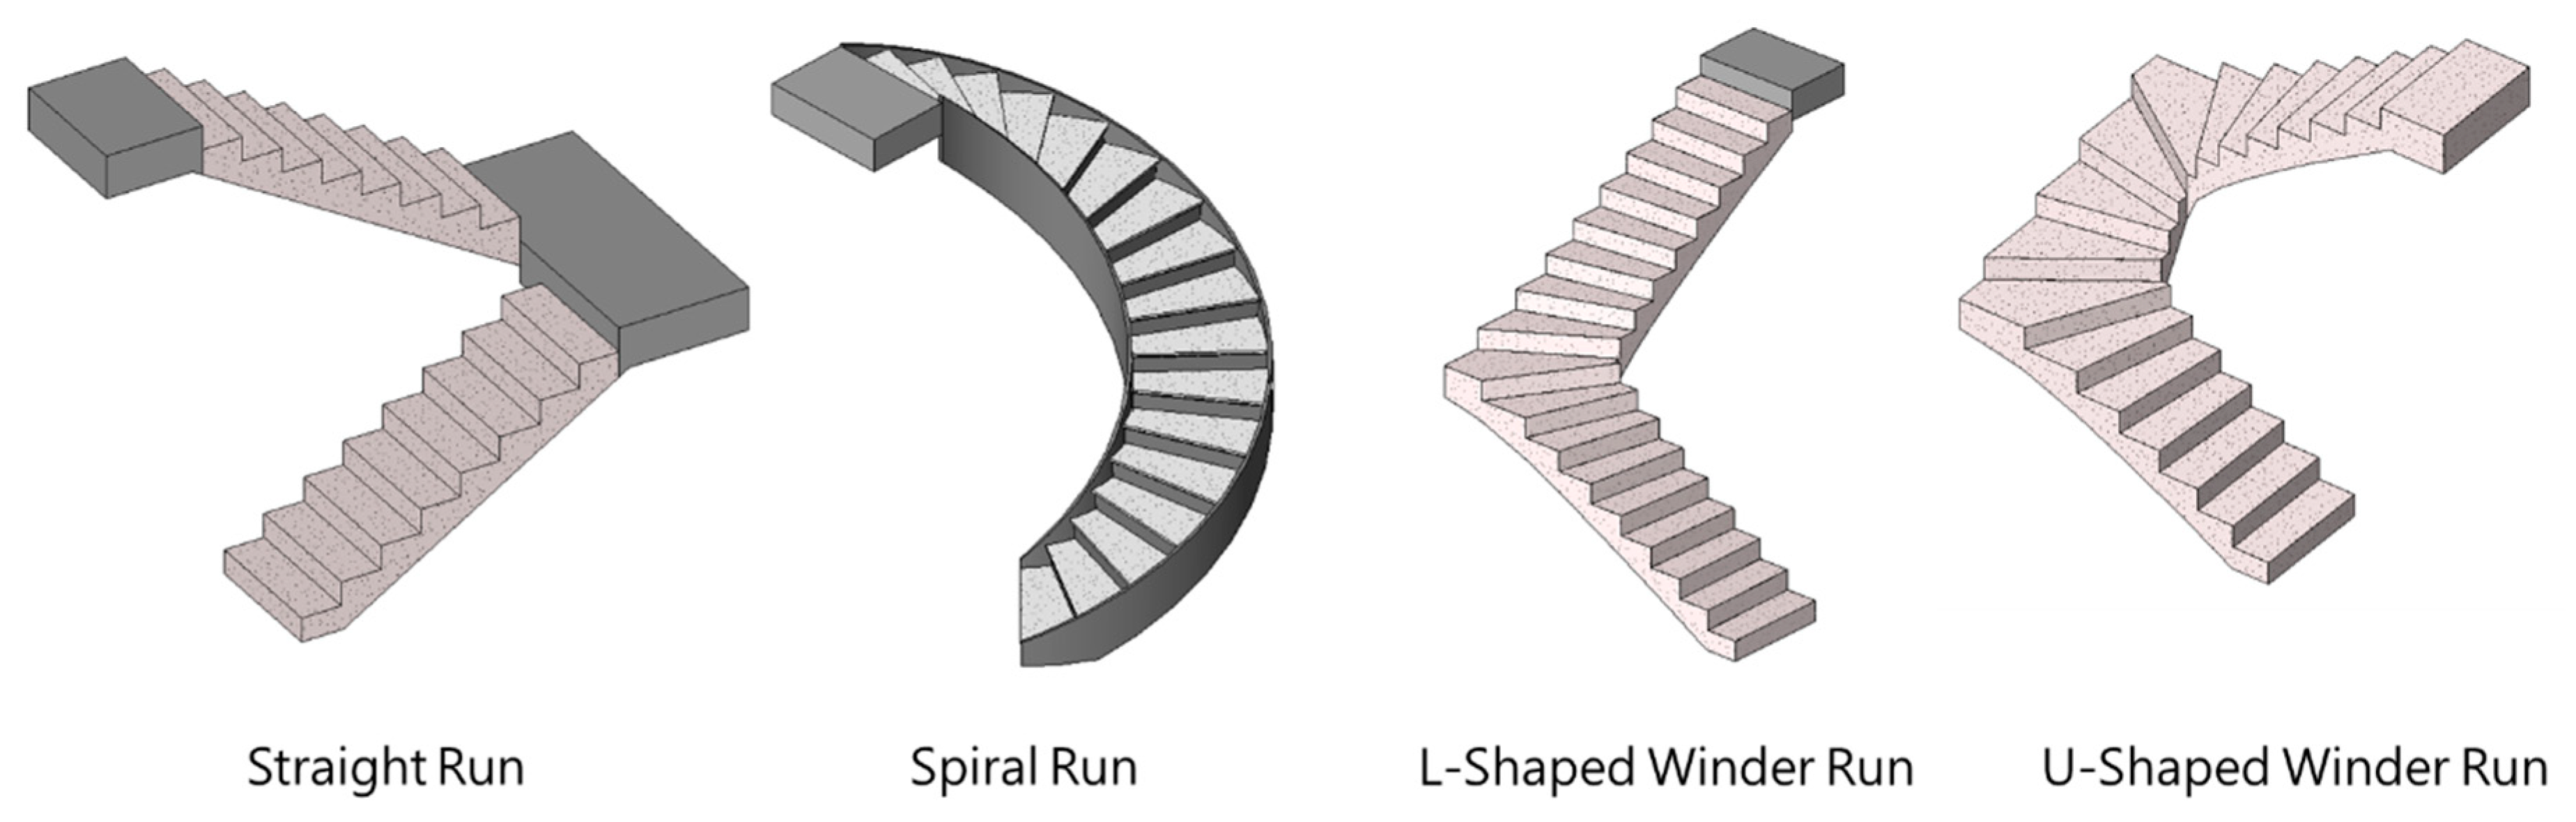 IJGI | Free Full-Text | Automatic Generation of High-Accuracy Stair Paths  for Straight, Spiral, and Winder Stairs Using IFC-Based Models